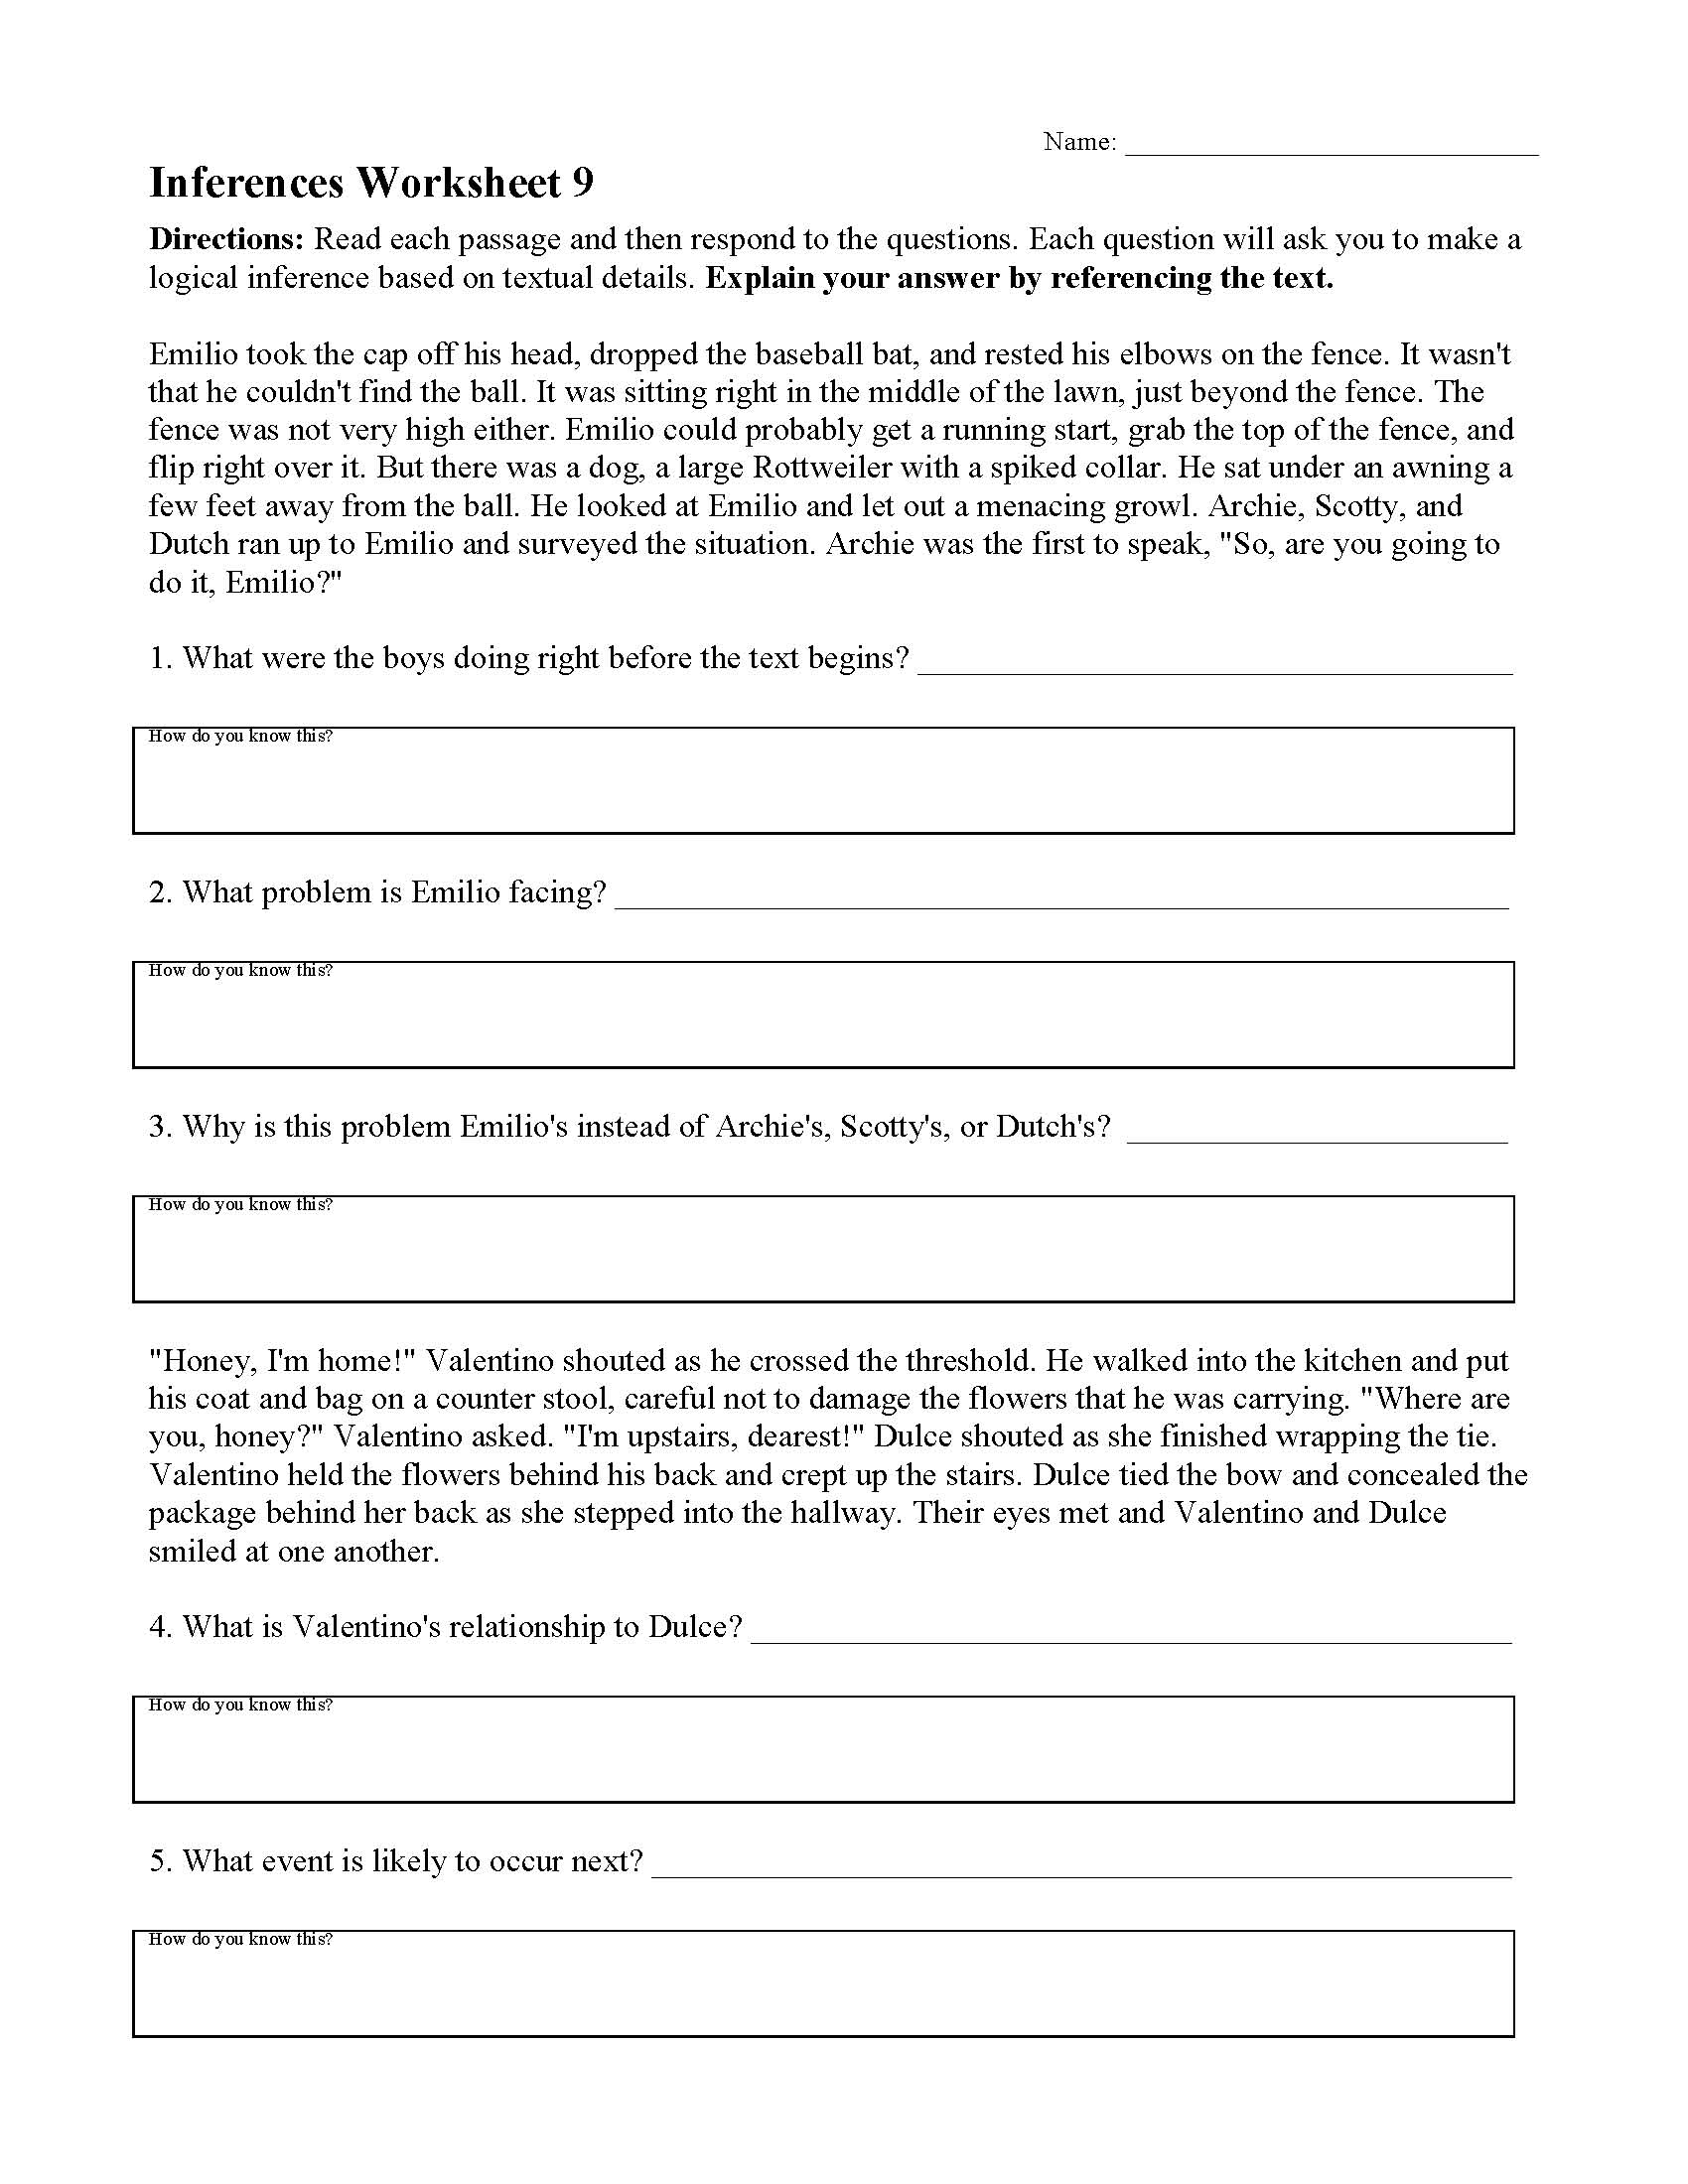 inferences-worksheet-9-reading-activity